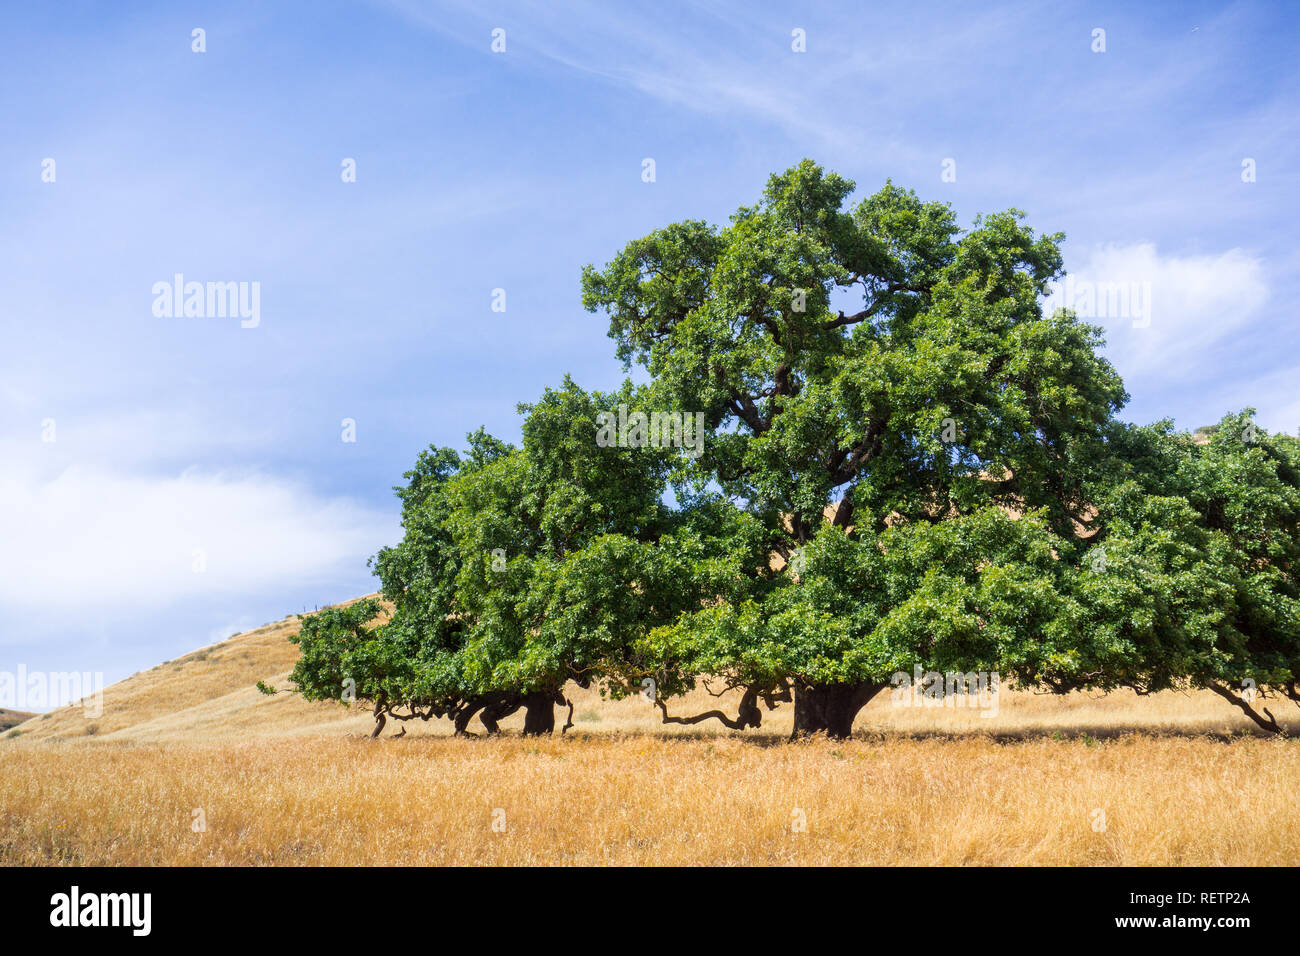 Large valley oak (Quercus lobata) surrounded by fields of dry grass, Santa Clara county, south San Francisco bay area, California Stock Photo